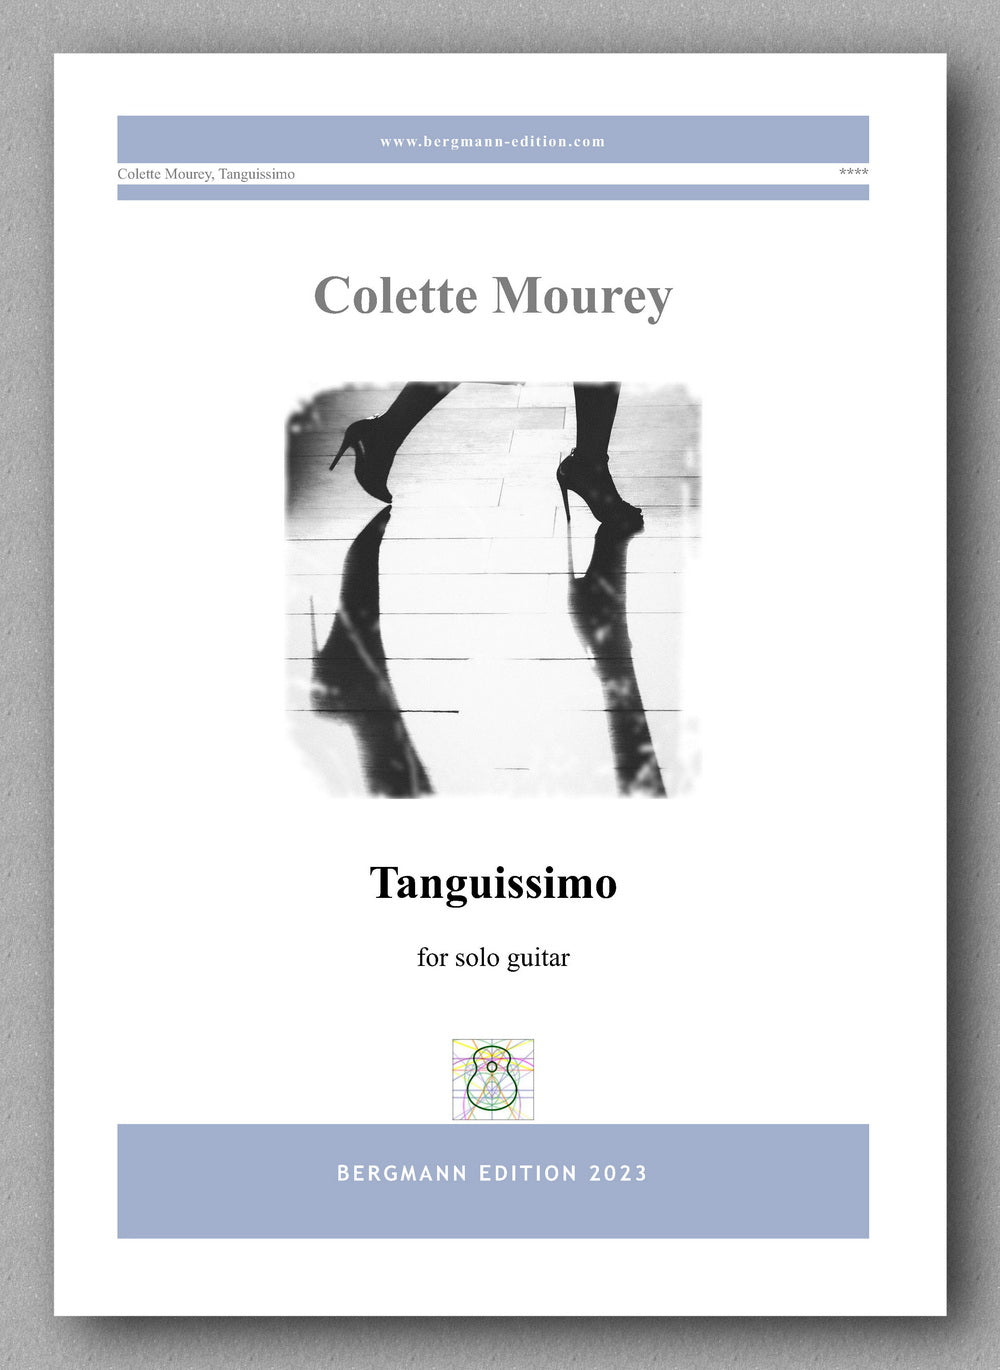 Tanguissimo by Colette Mourey - preview of the cover